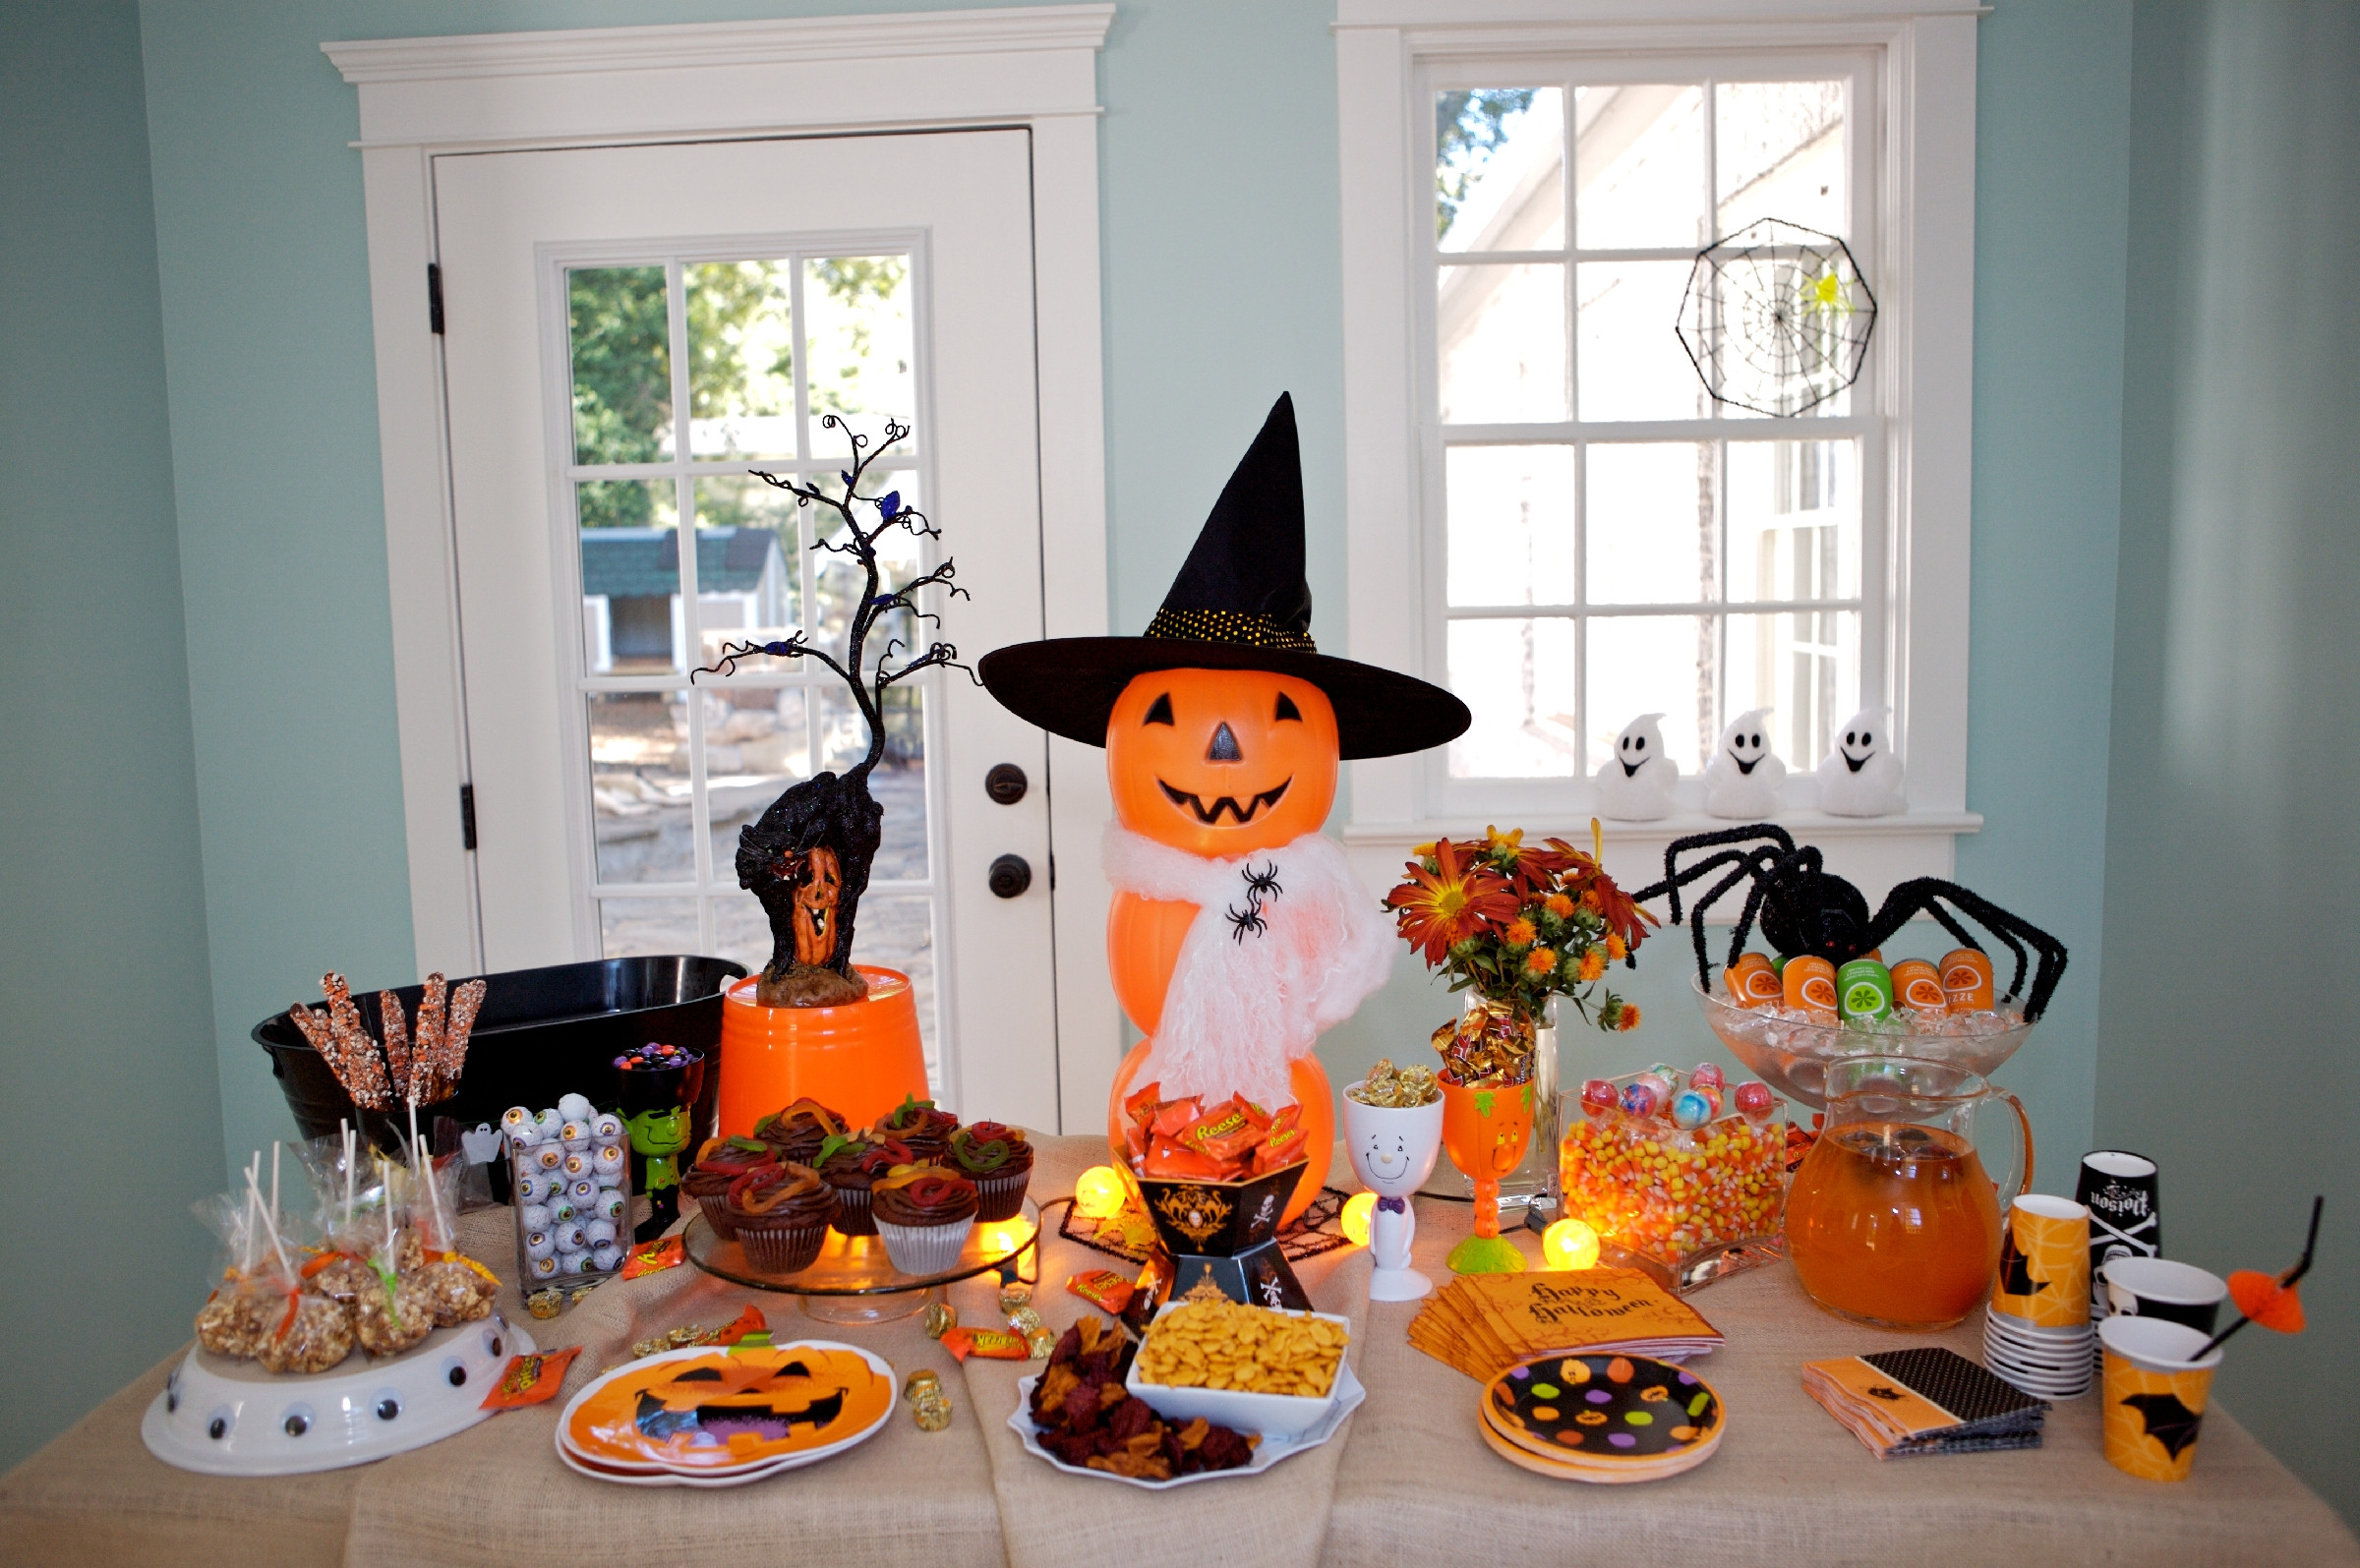 Halloween Decorating Party Ideas
 Martie Knows Parties BLOG Martie s Halloween Party